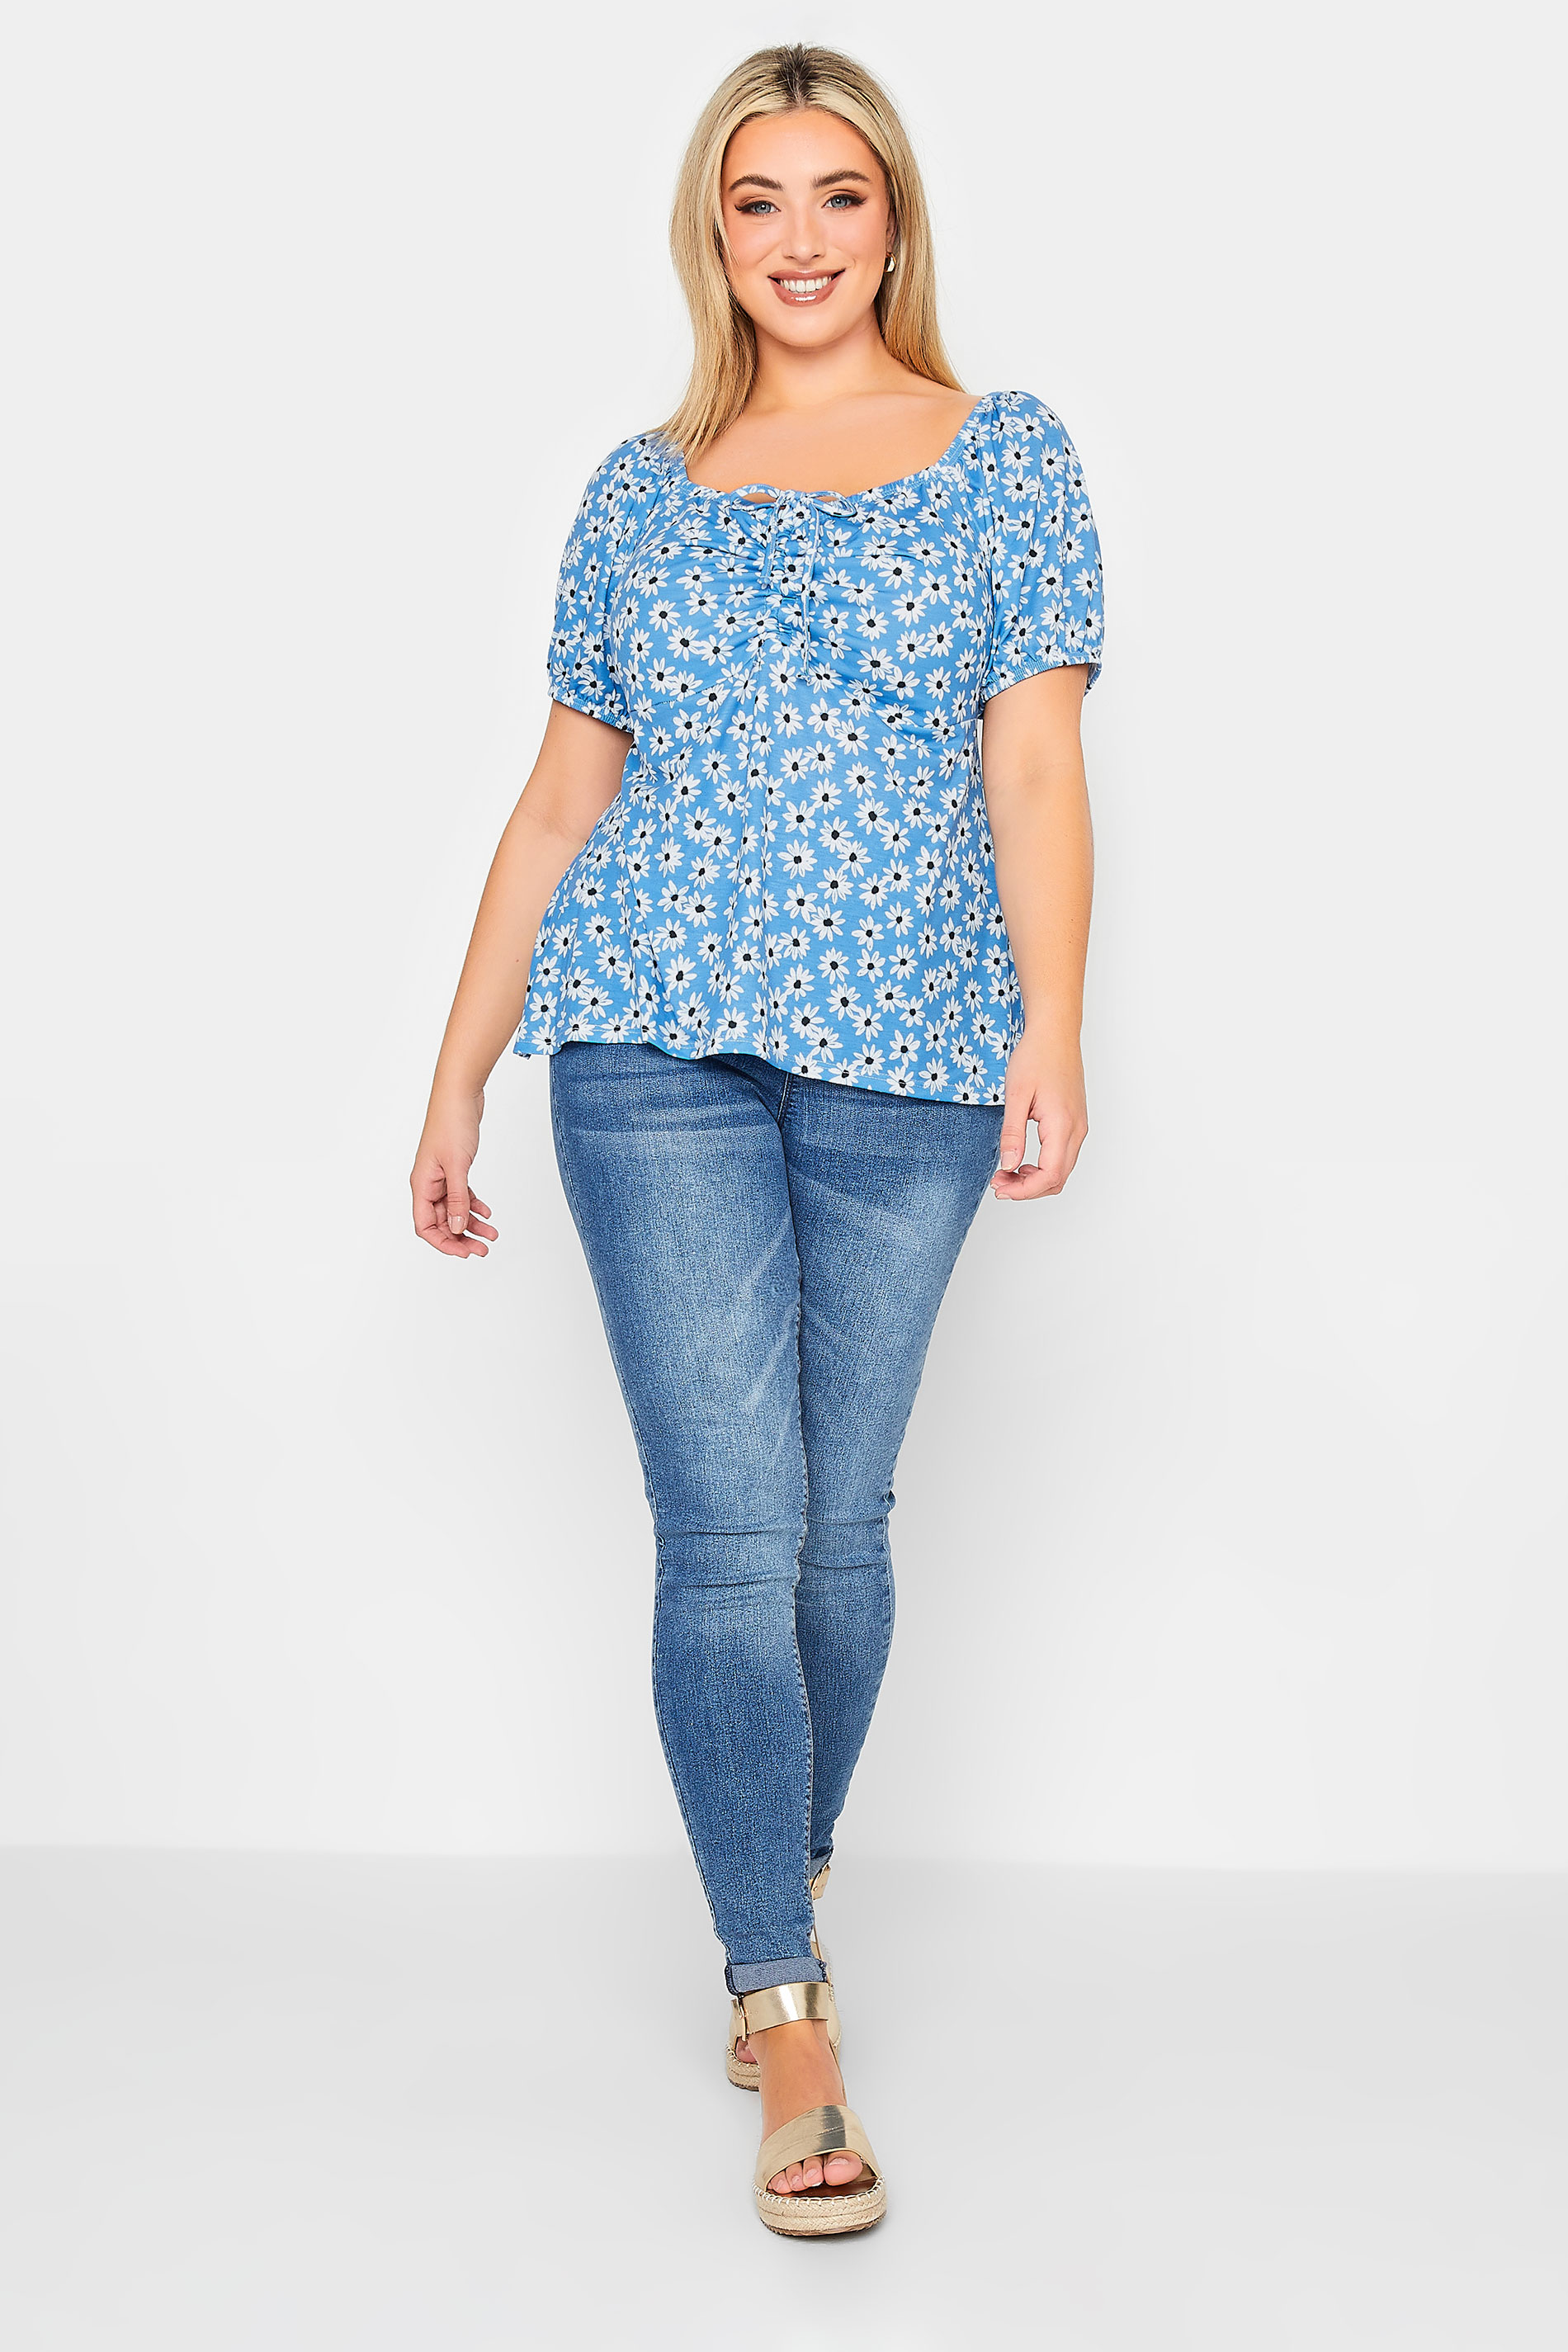 YOURS PETITE Plus Size Blue Daisy Print Ruched Front Top | Yours Clothing 2